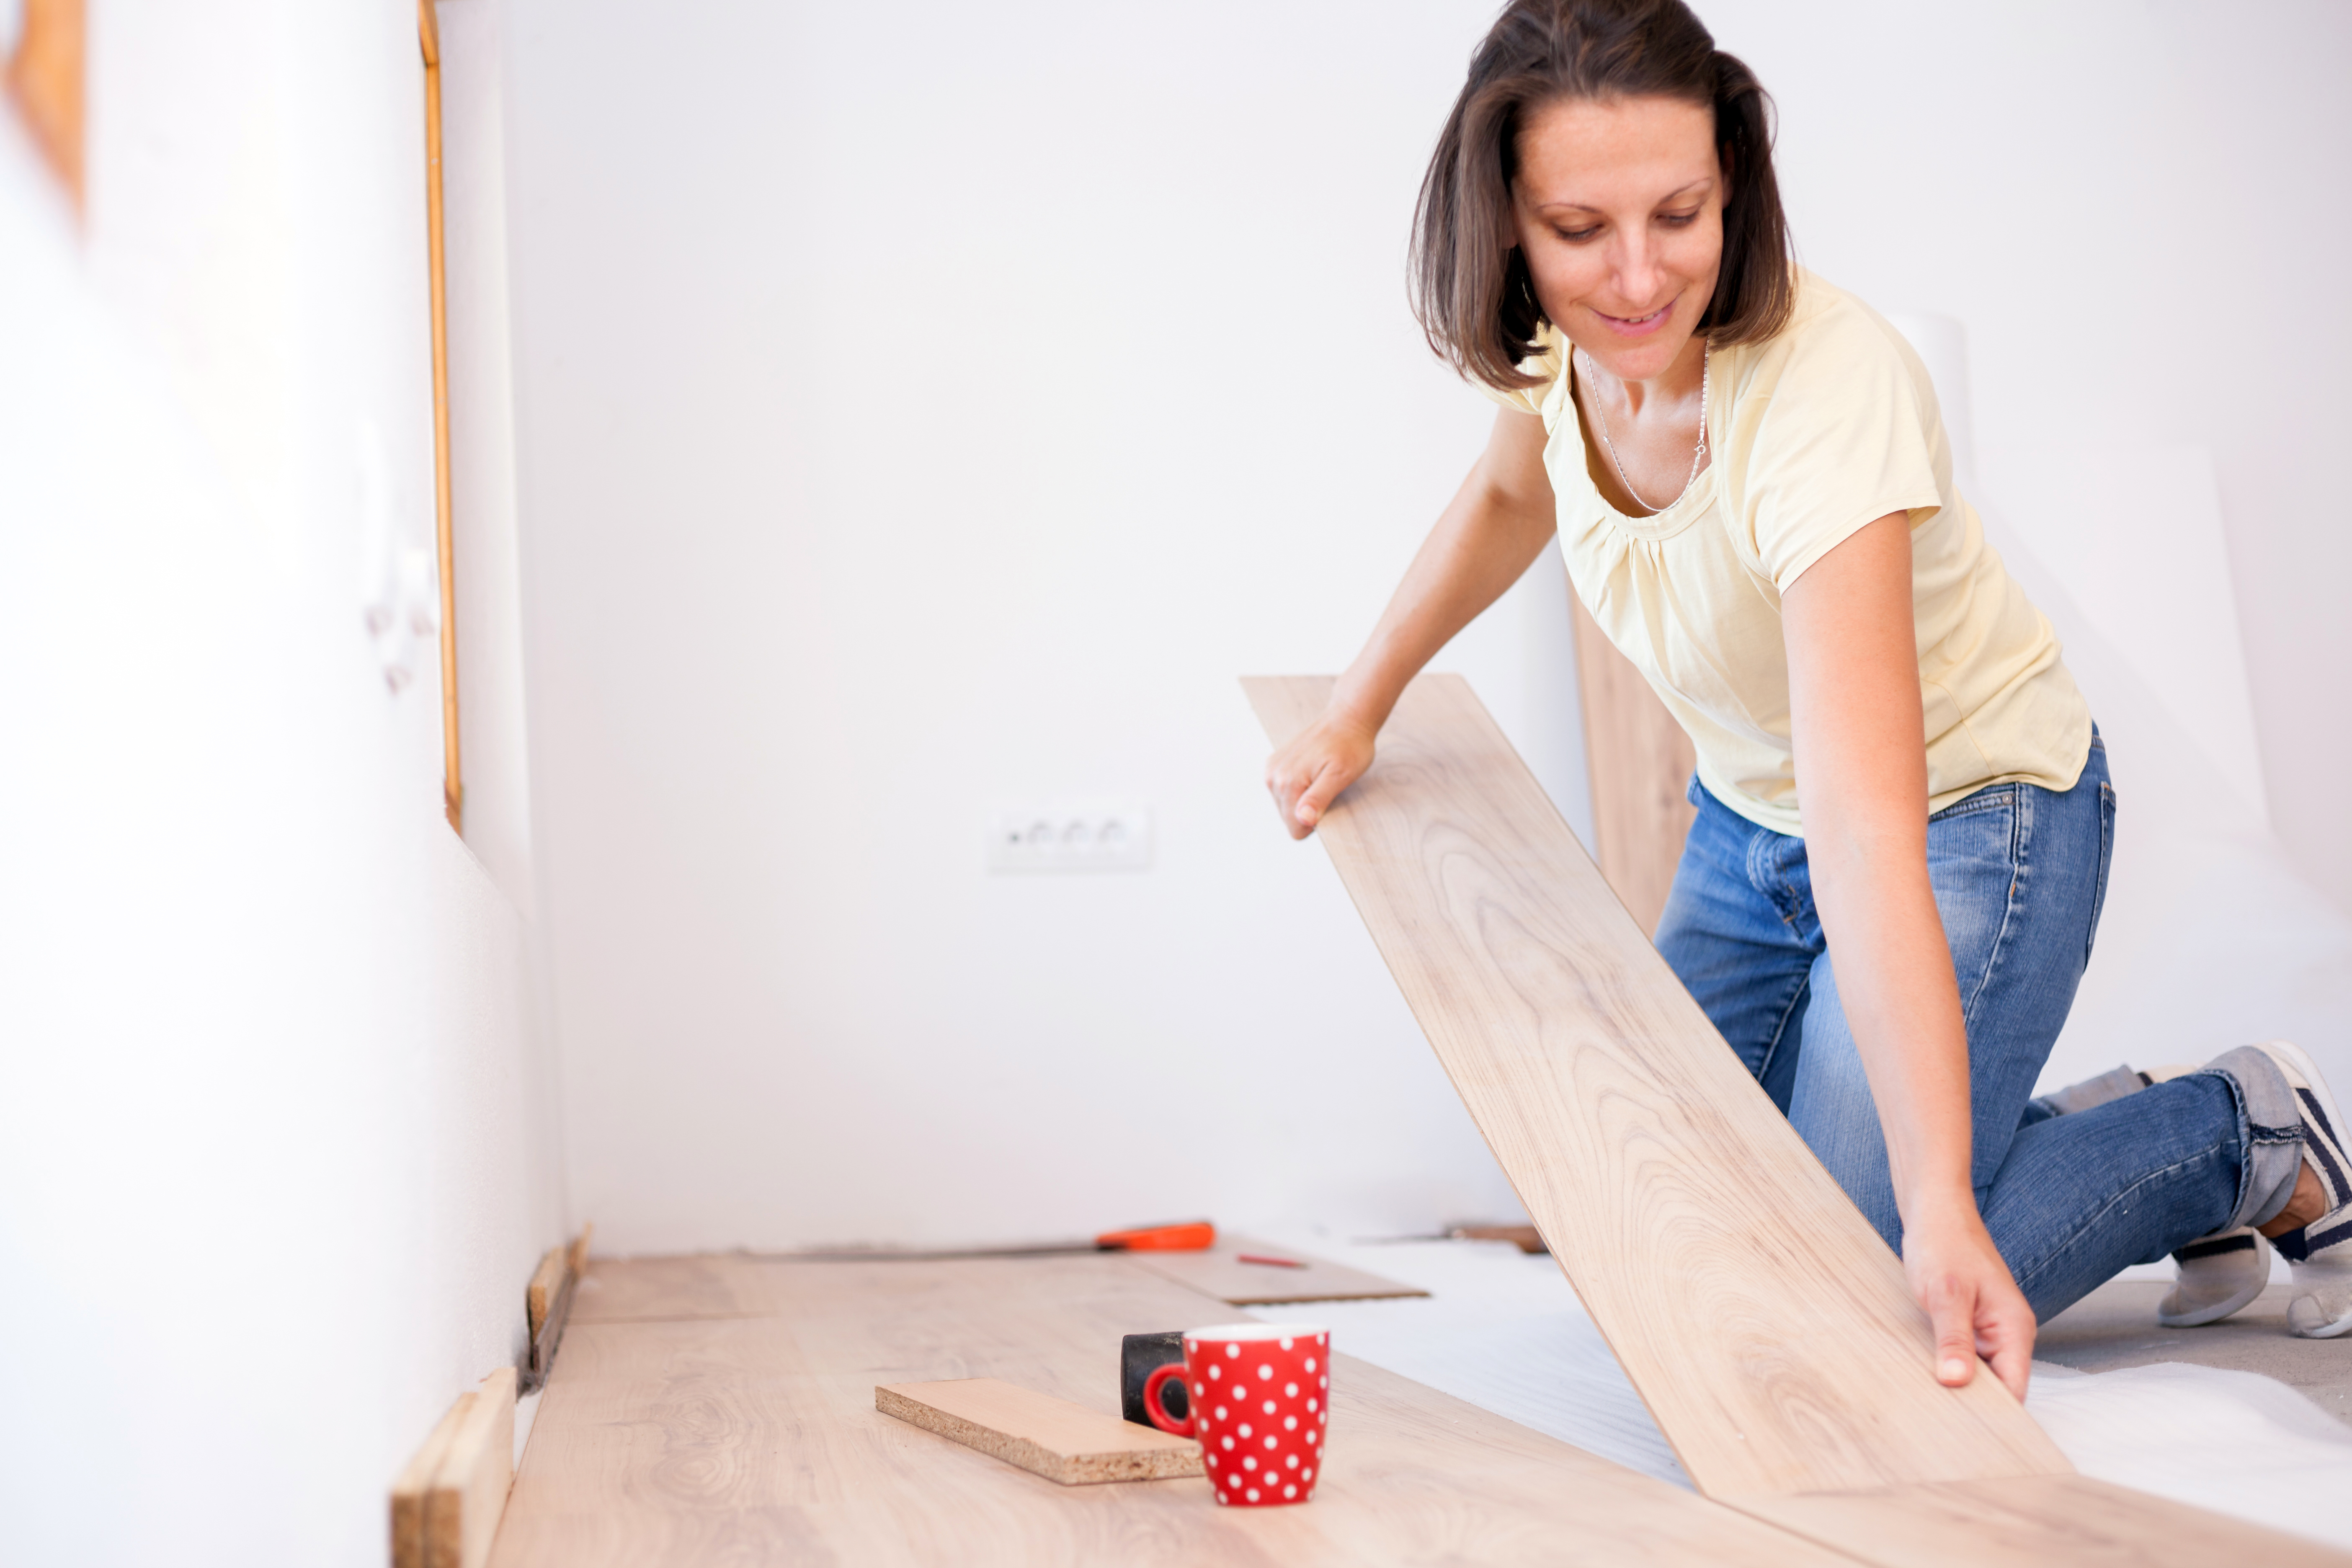 The Easiest Flooring To Install Our, What Is The Easiest Laminate Flooring To Install